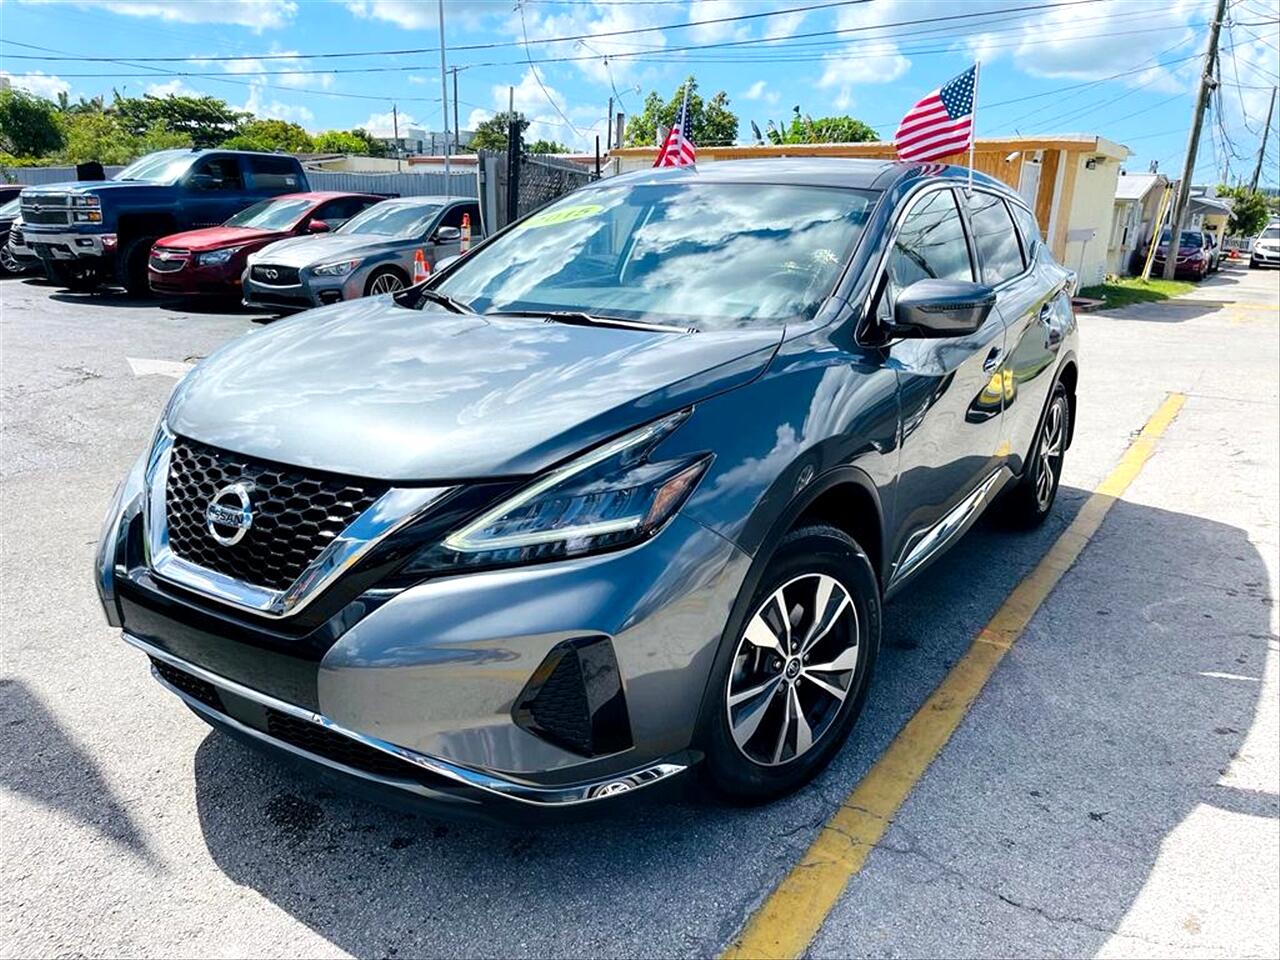 2015 Nissan Murano AWD 4dr S